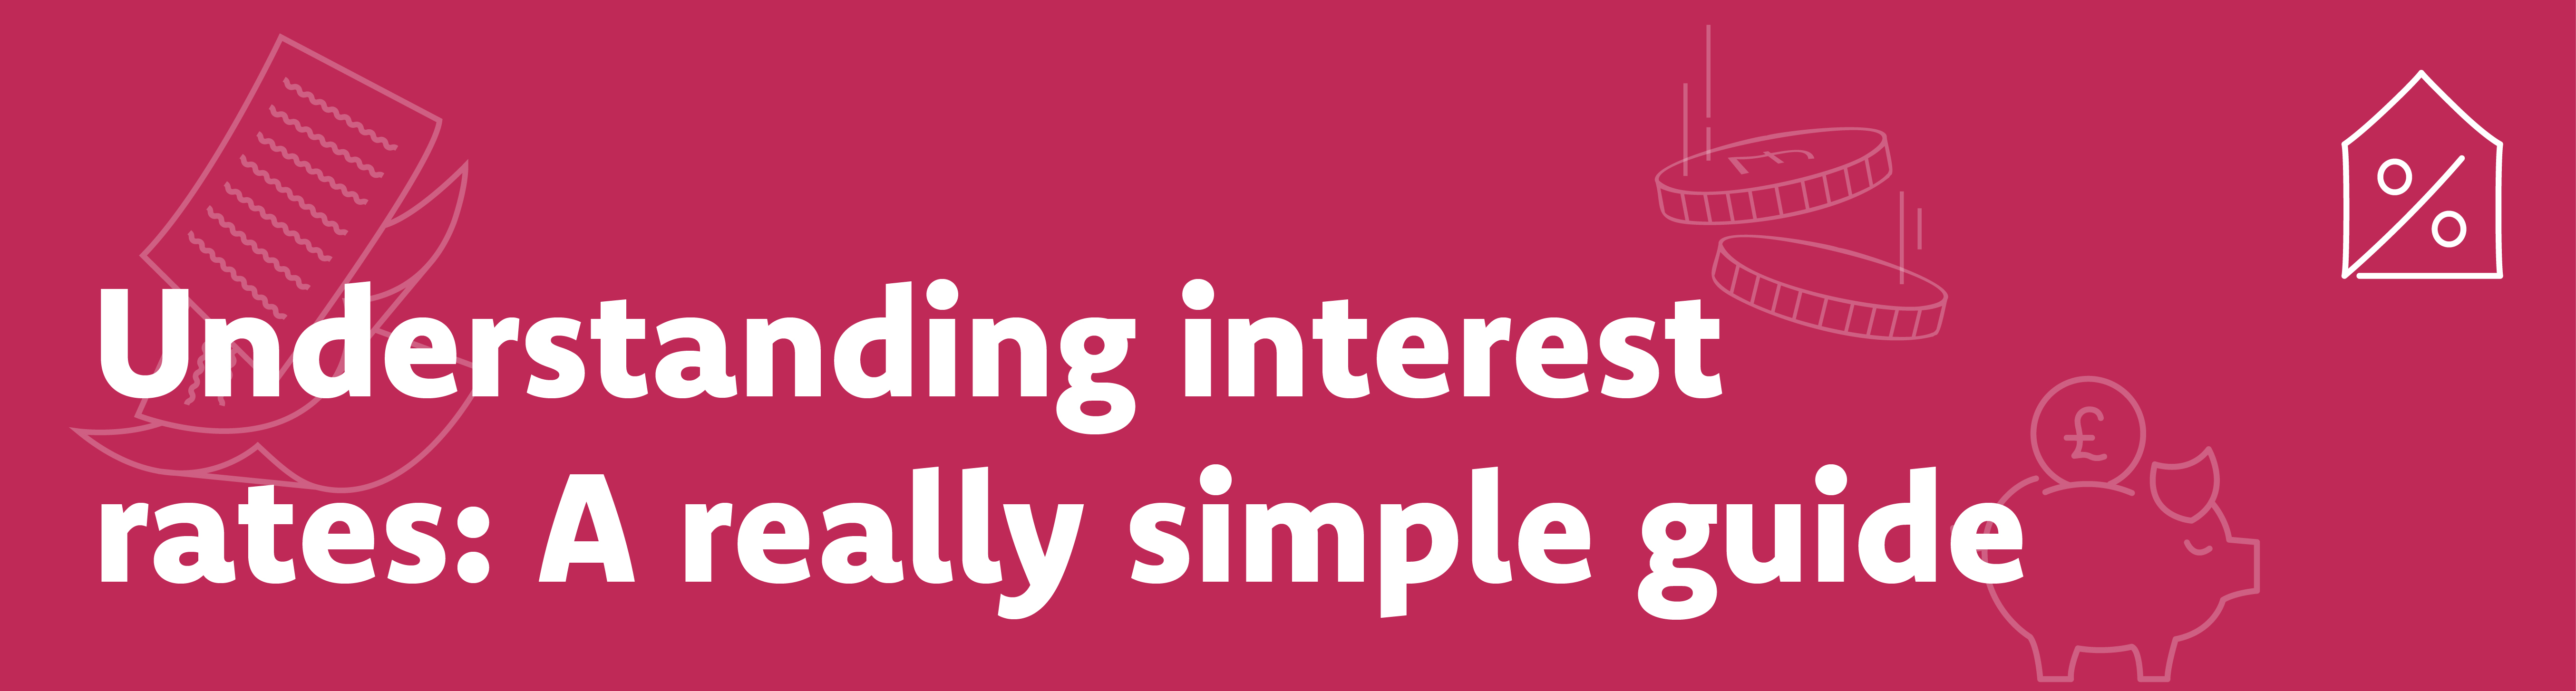 Understanding interest rates: A really simple guide